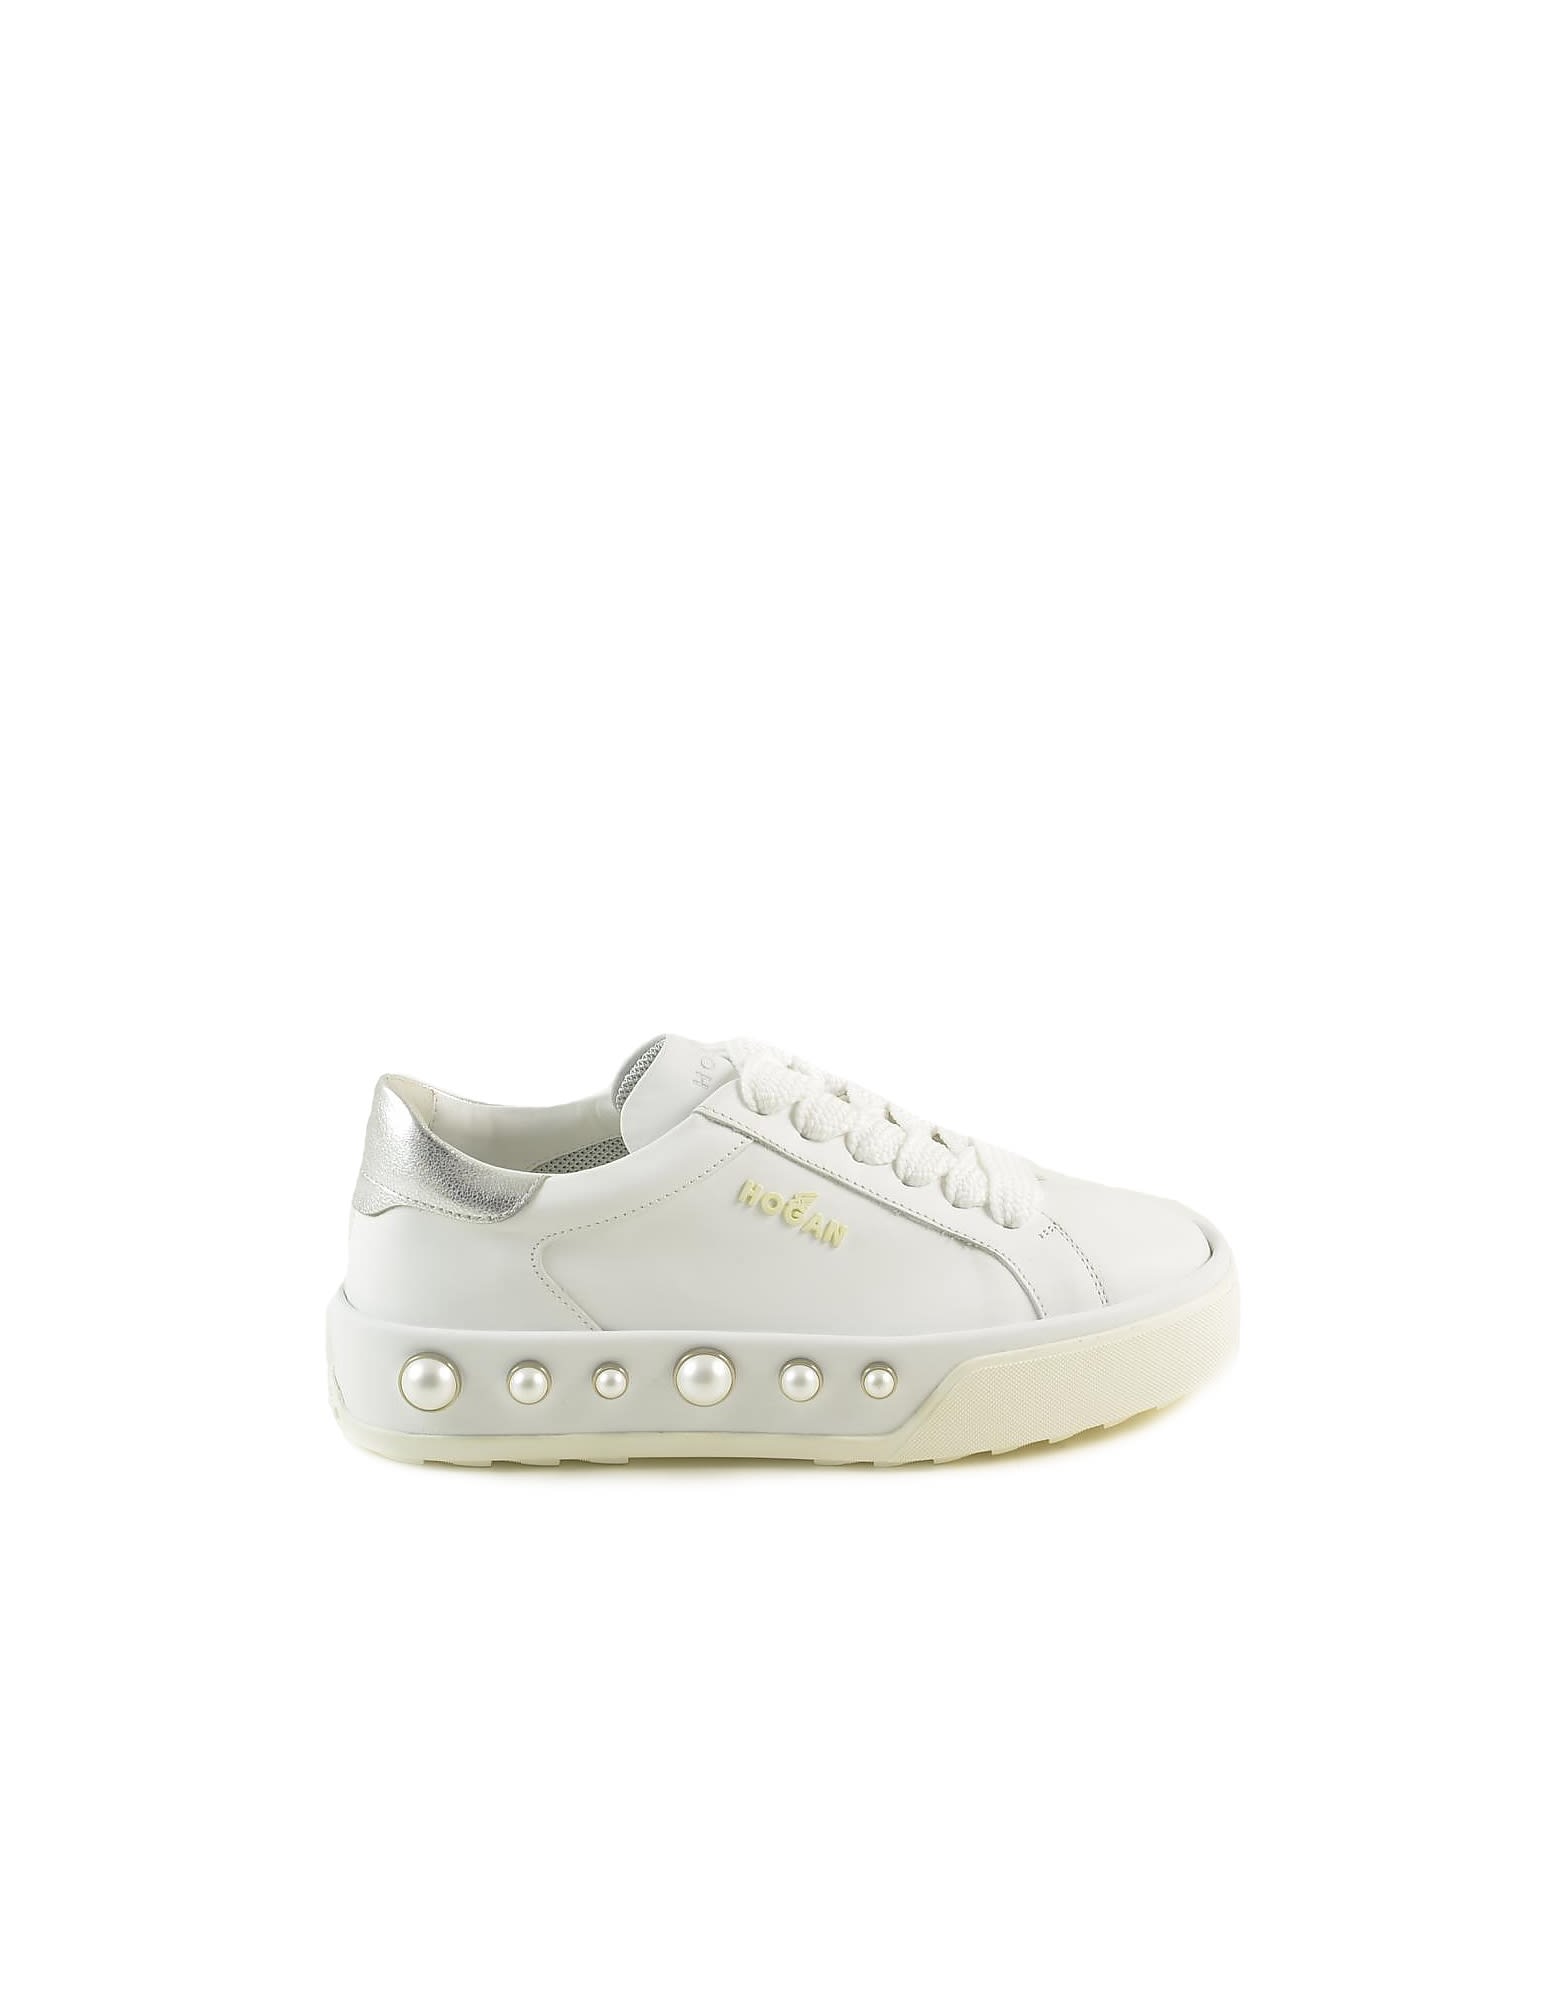 Hogan White Leather And Pearls Womens Sneakers